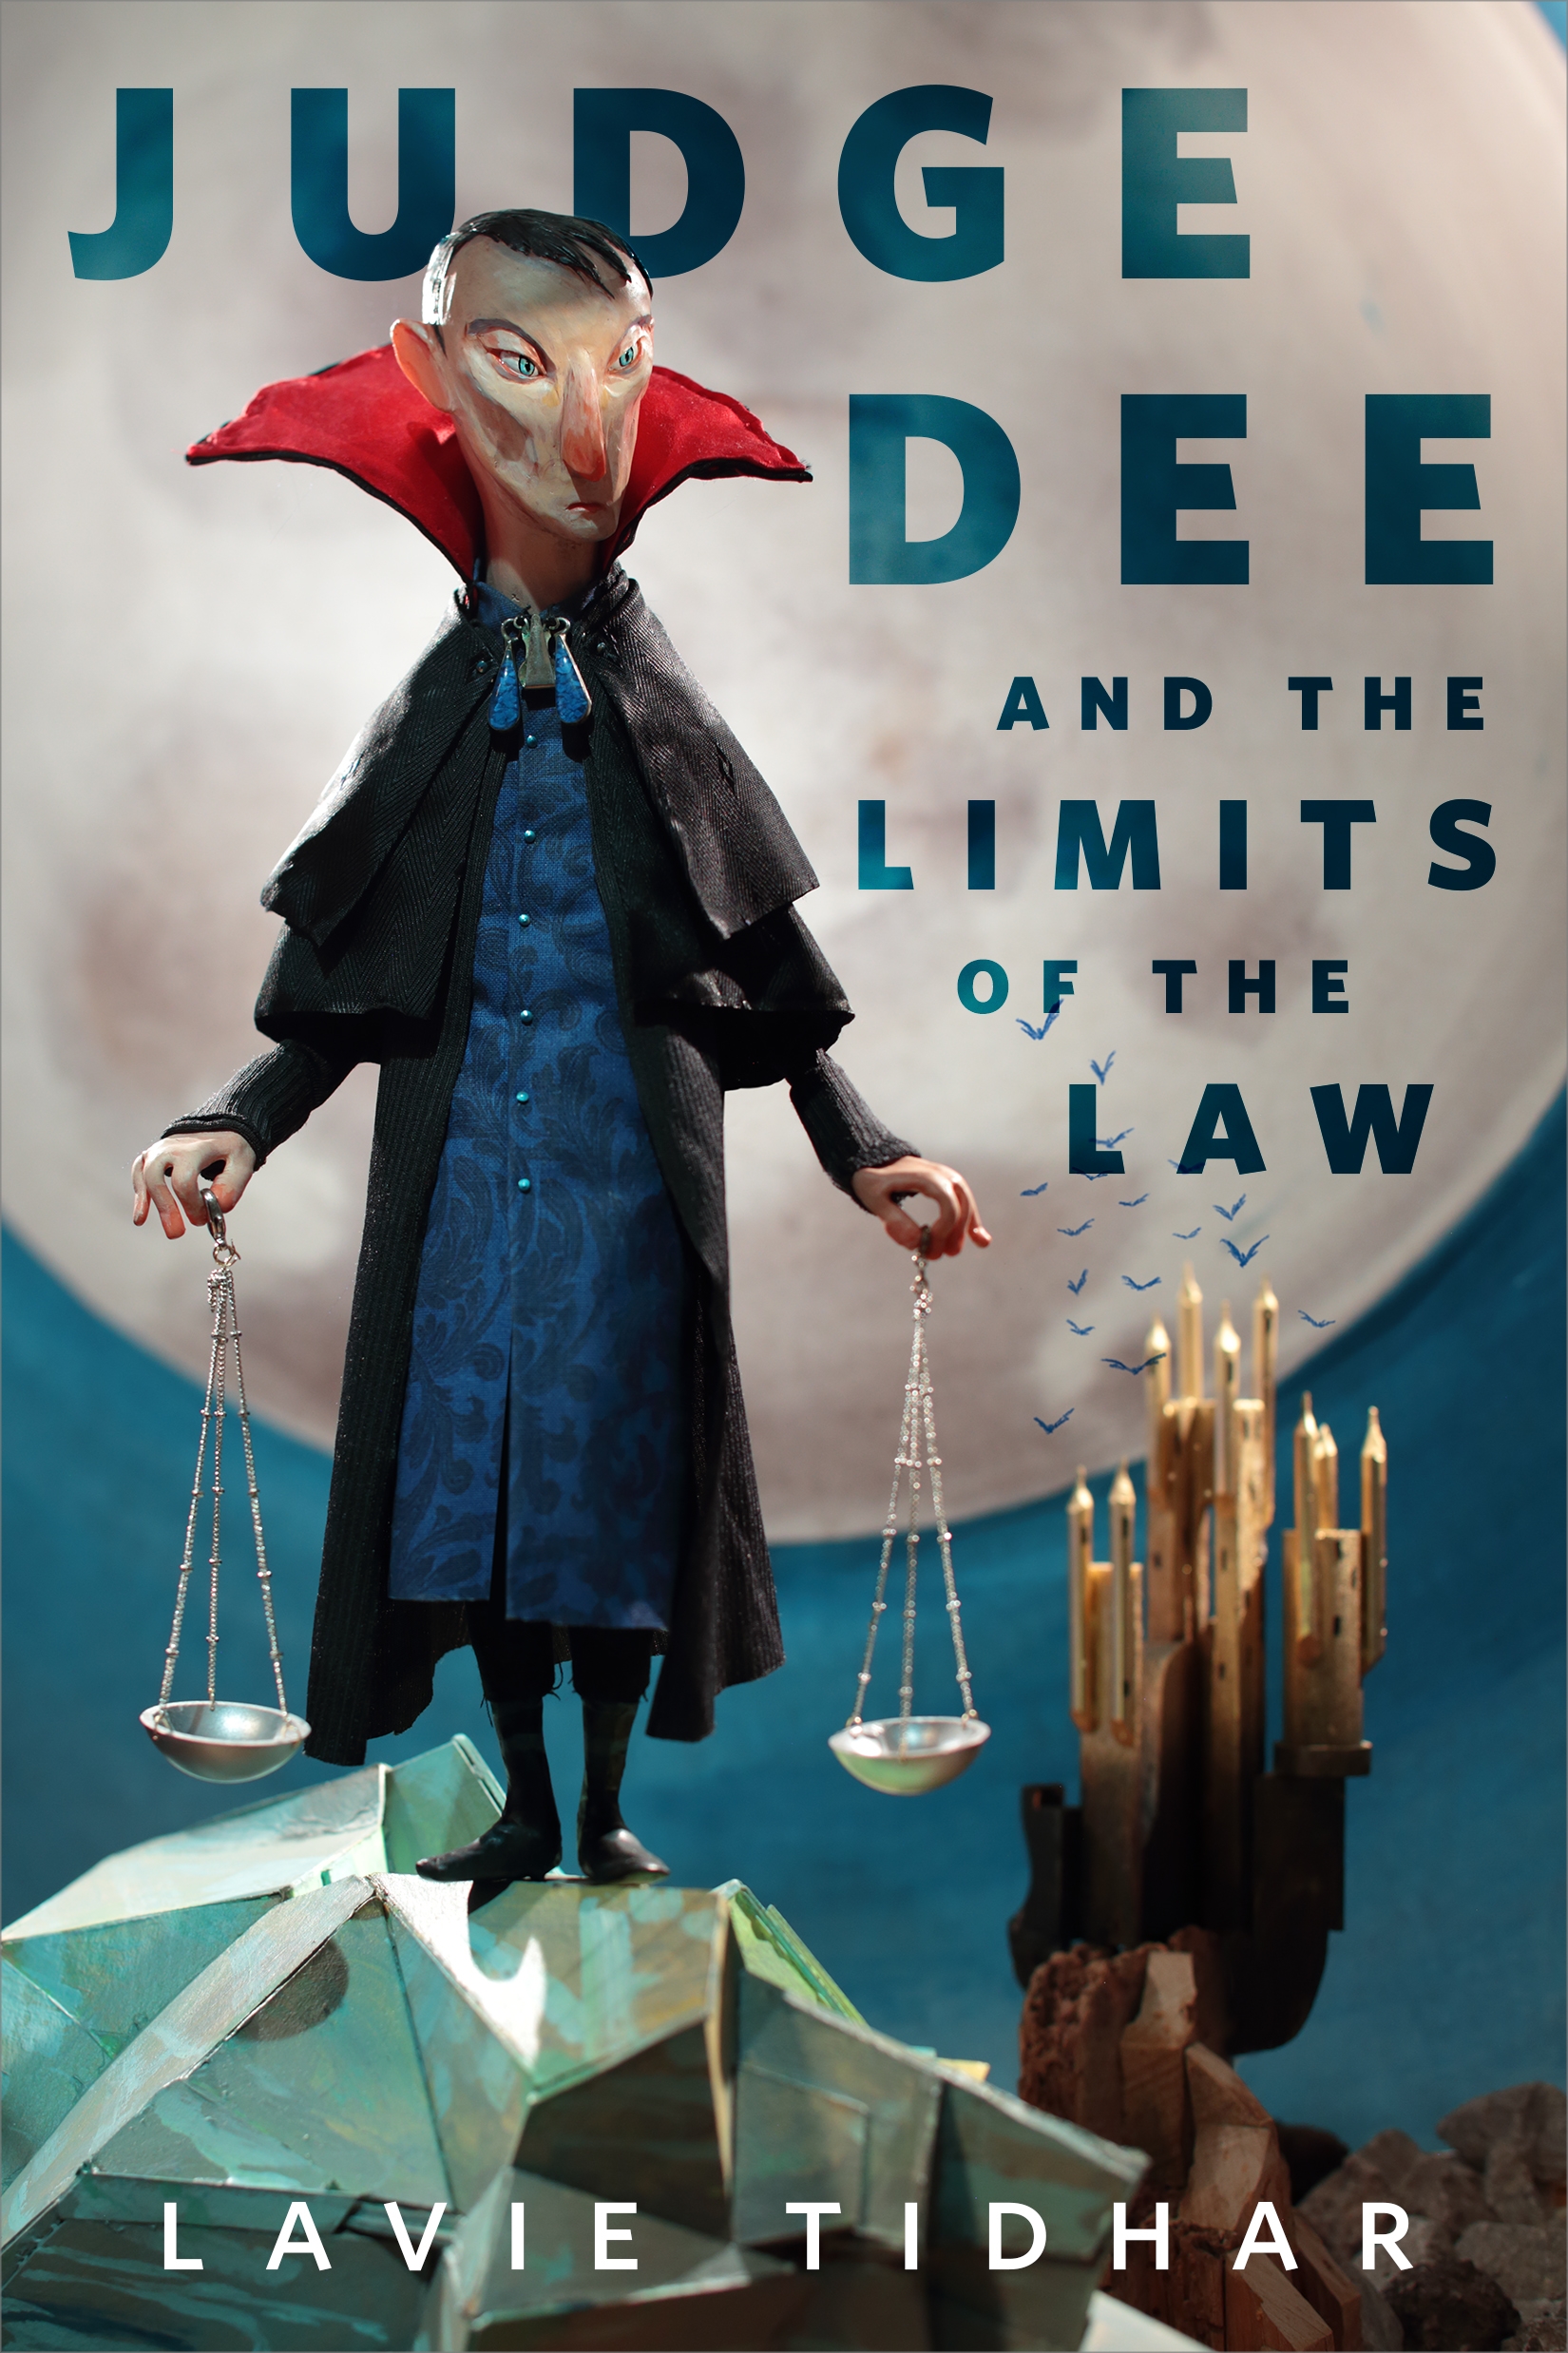 Judge Dee and the Limits of the Law : A Tor.com Original by Lavie Tidhar